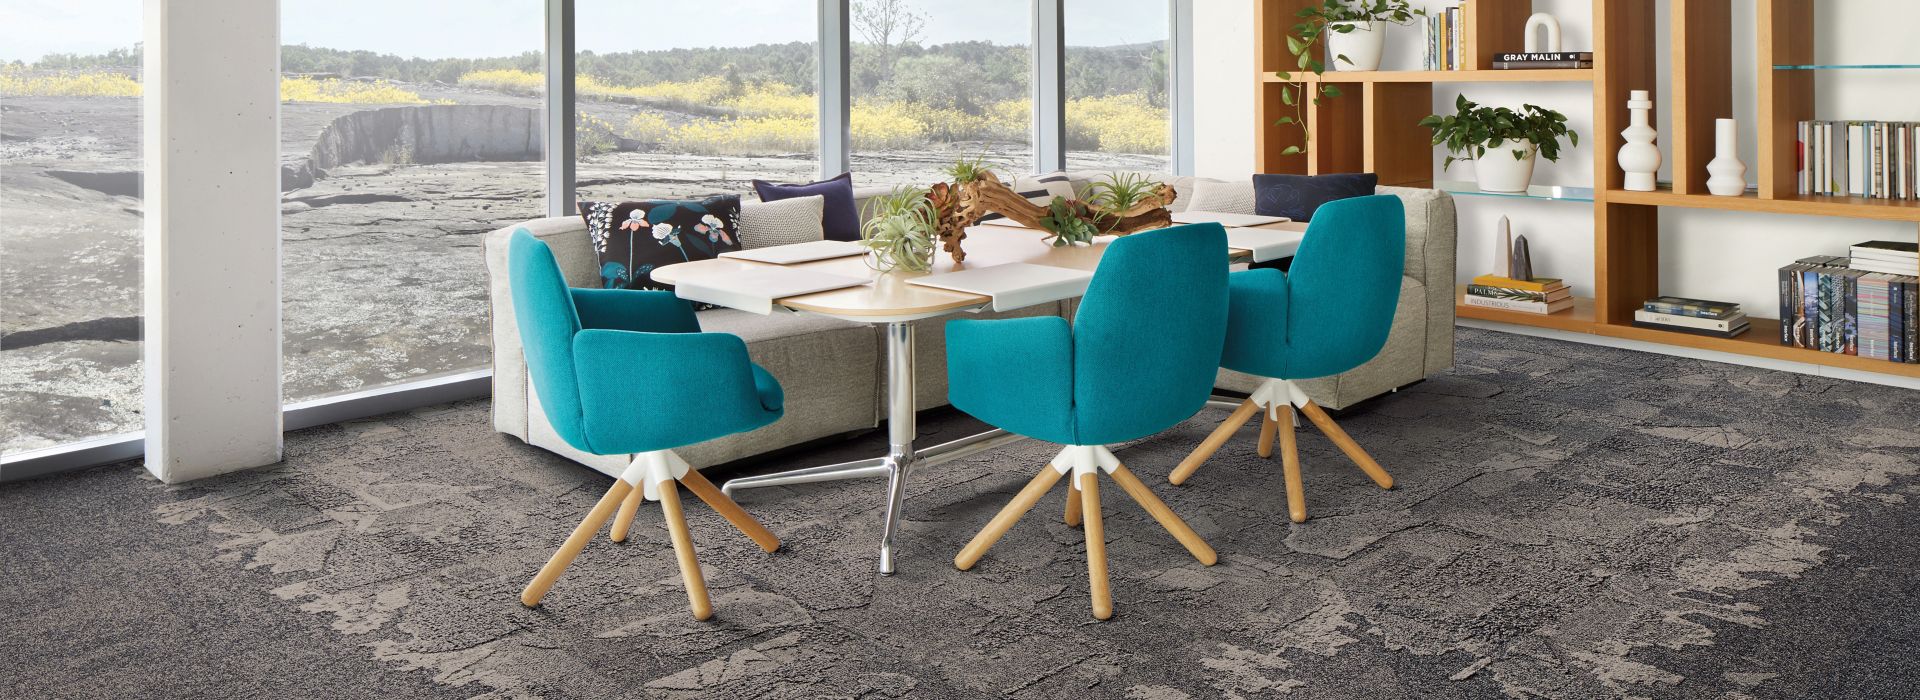 Interface Flat Rock, Bridge Creek, and Mountain Rock in private meeting room with blue chairs and large windows image number 1